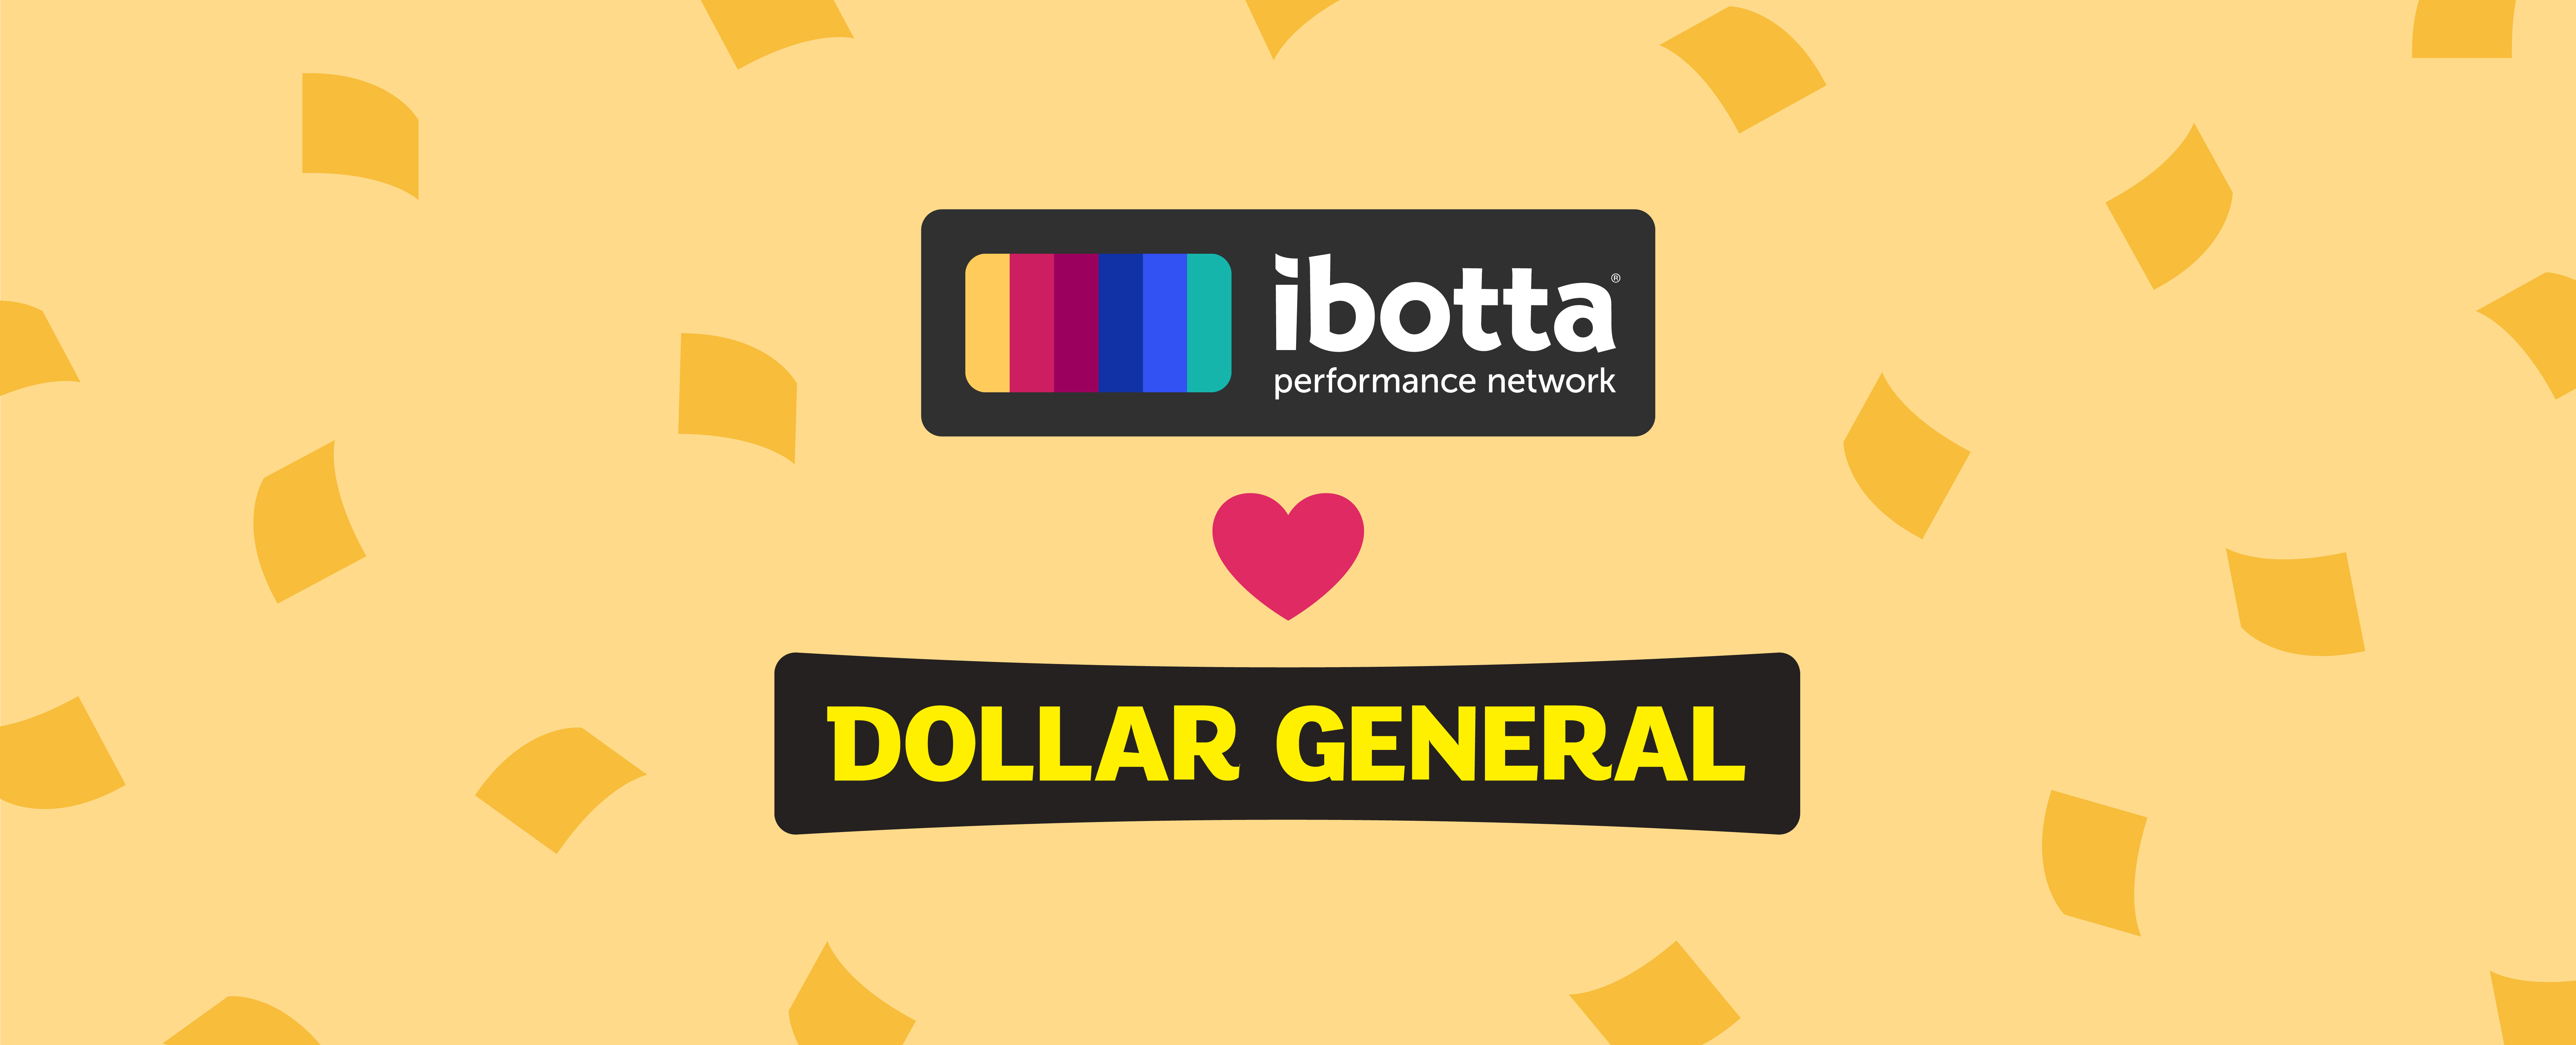 dollar-general-partners-with-ibotta-joins-the-ipn